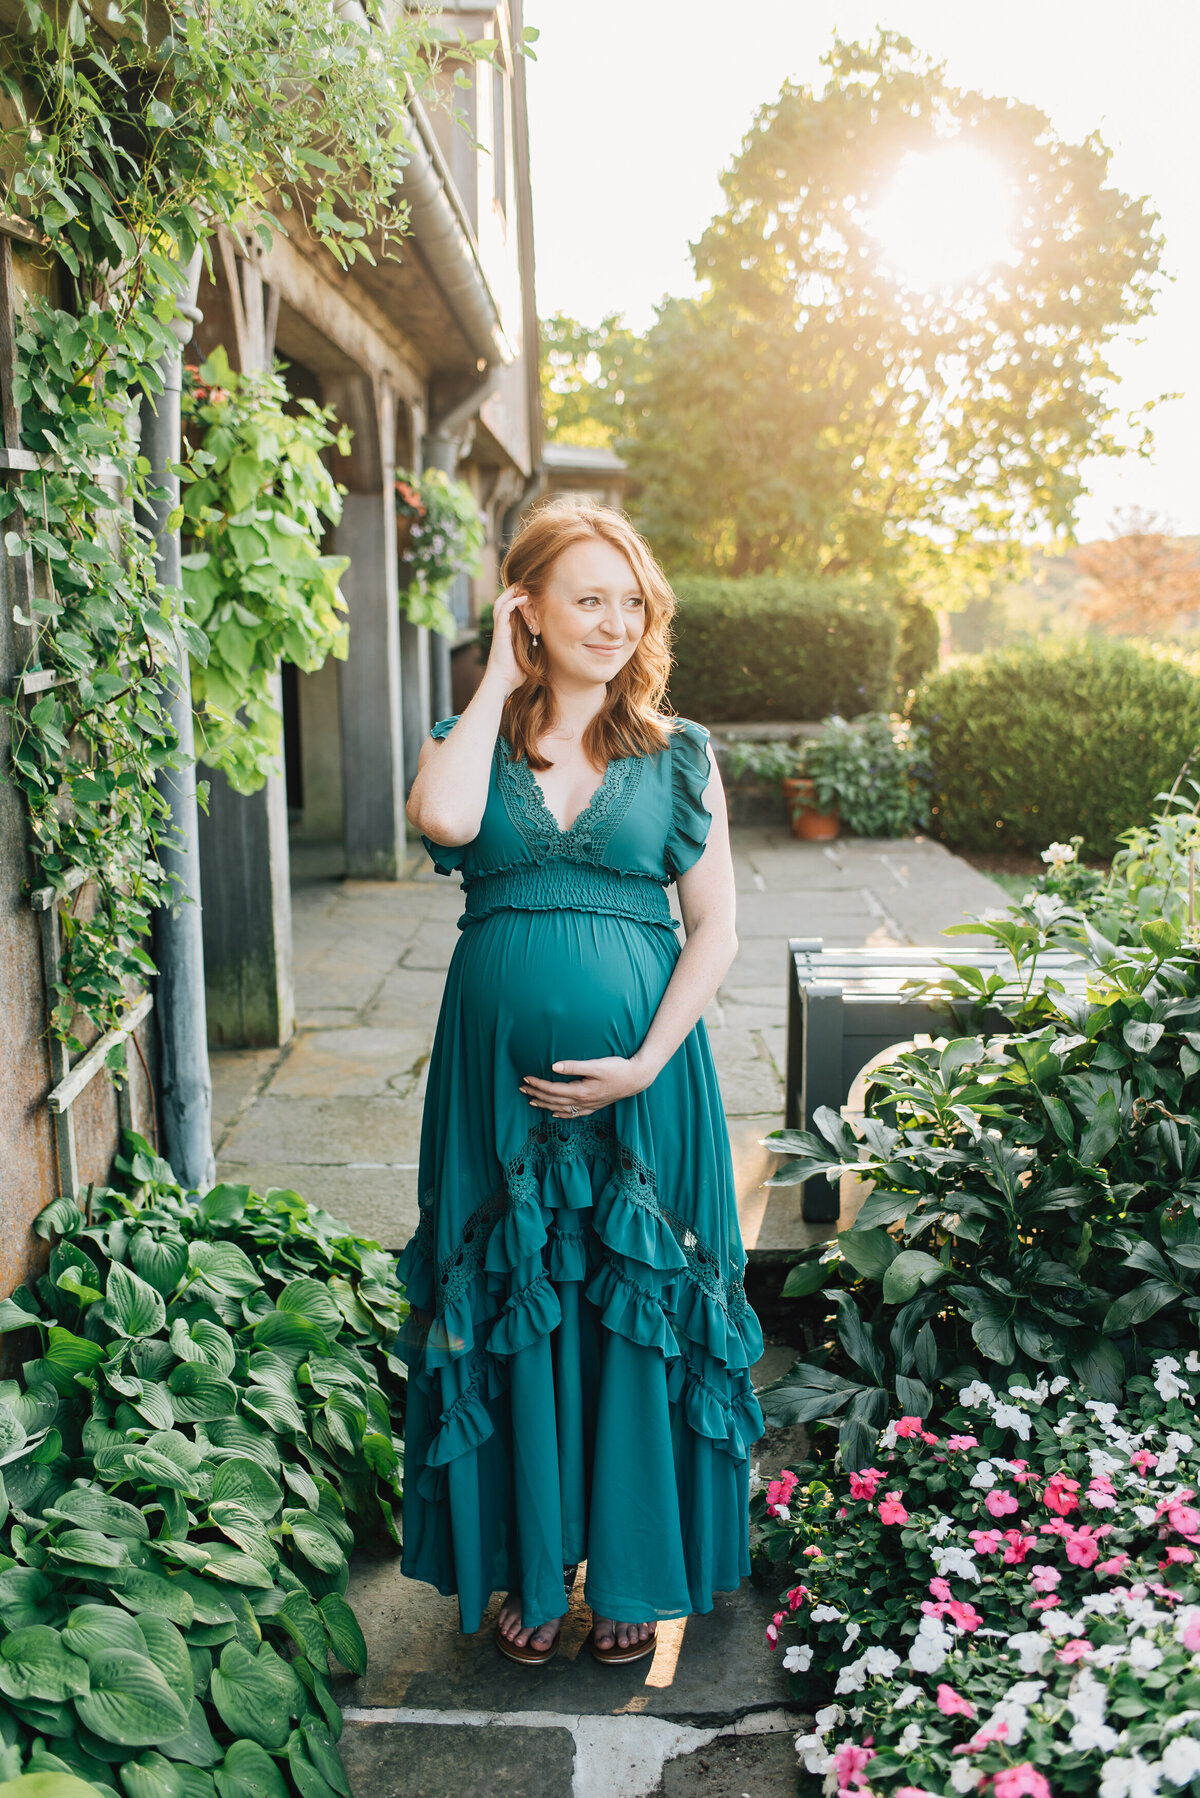 Pregnant mom in teal dress smiling off camera